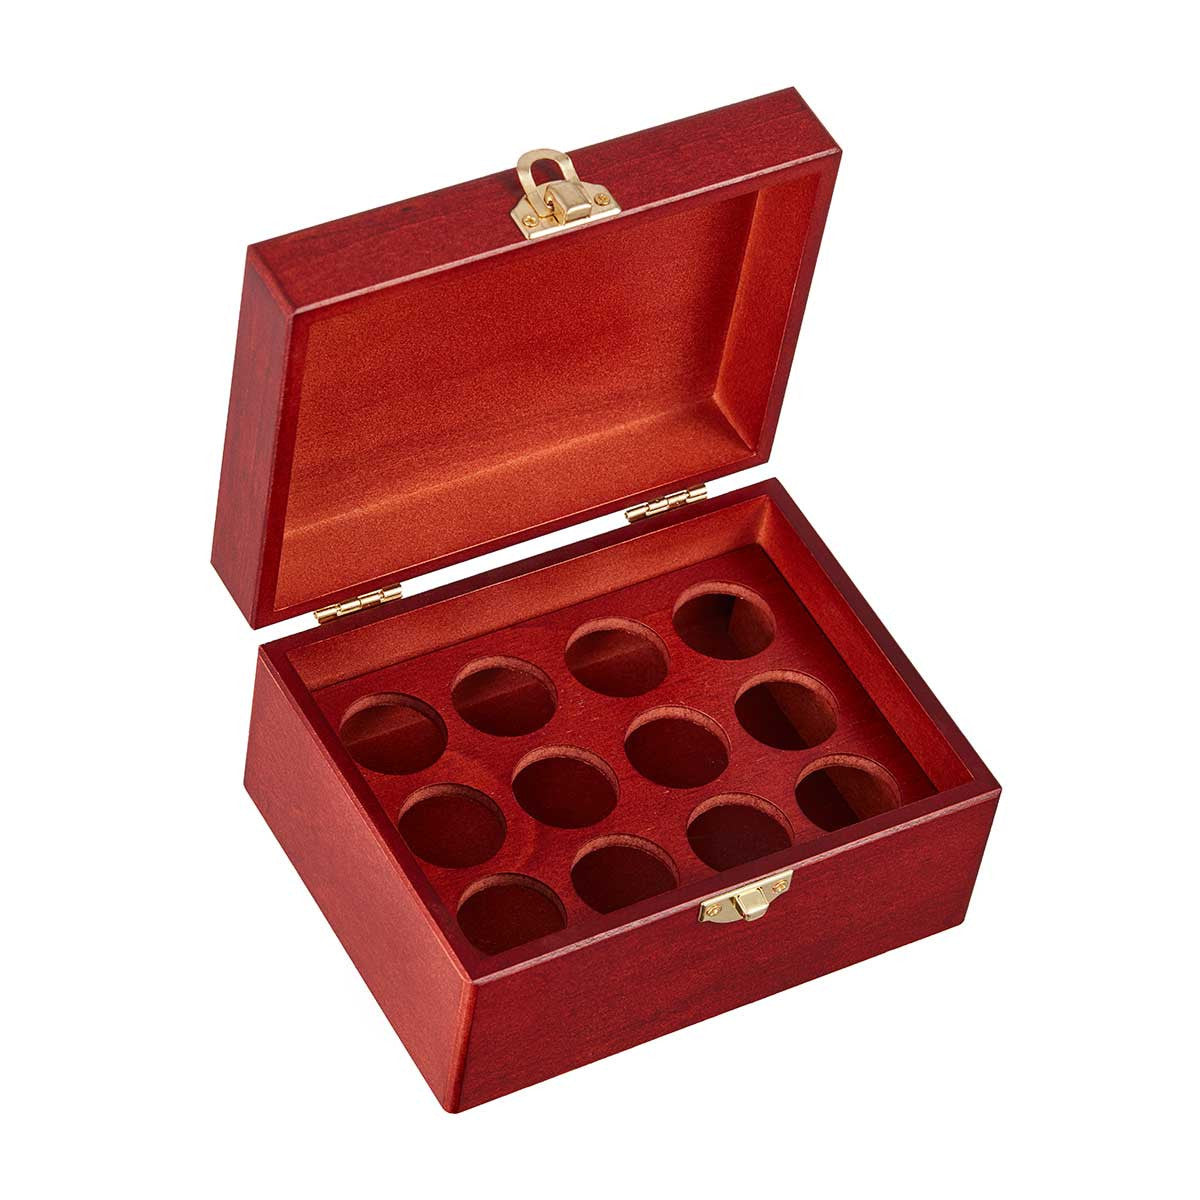 Download Wooden Storage Box For 12 Essential Oils Organic Aromas